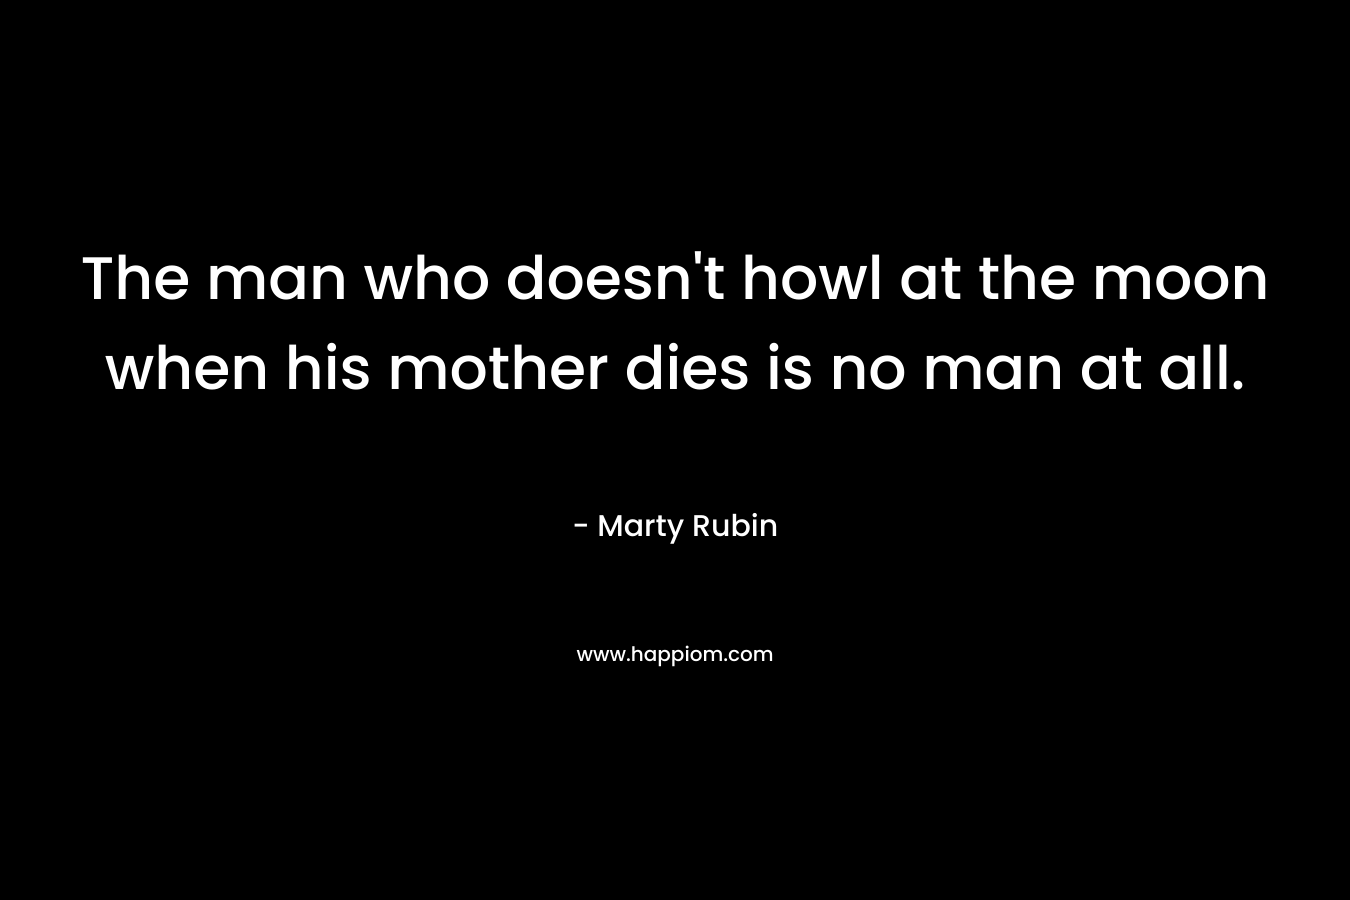 The man who doesn’t howl at the moon when his mother dies is no man at all. – Marty Rubin